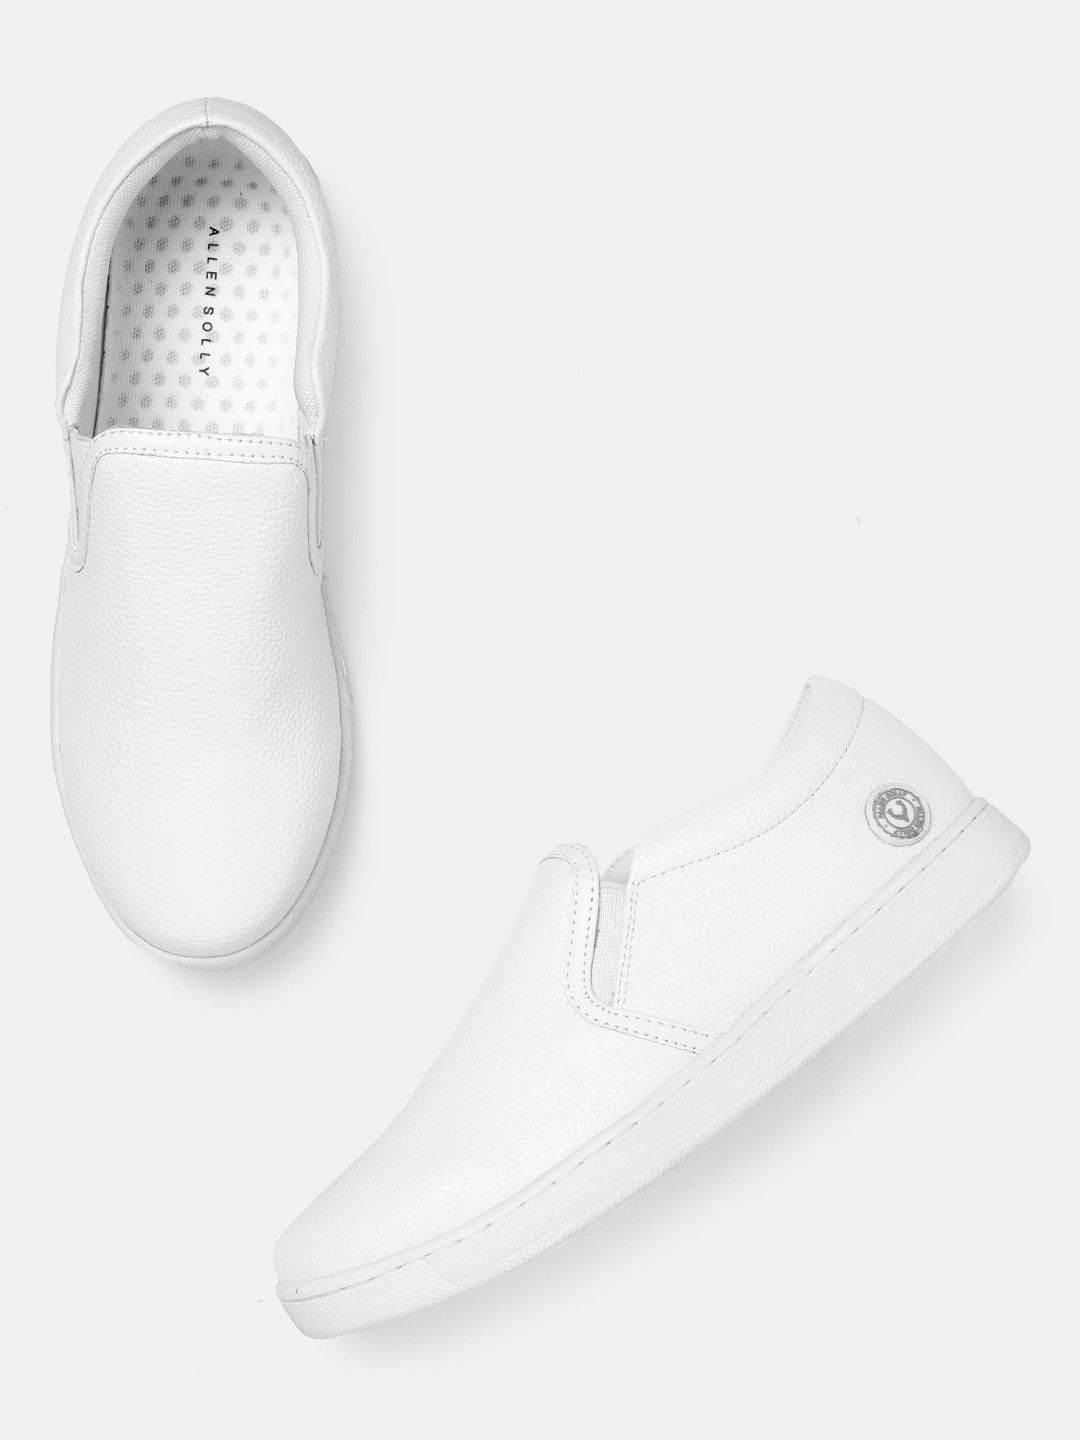 Allen Solly Women White Solid Slip-On Sneakers Price in India